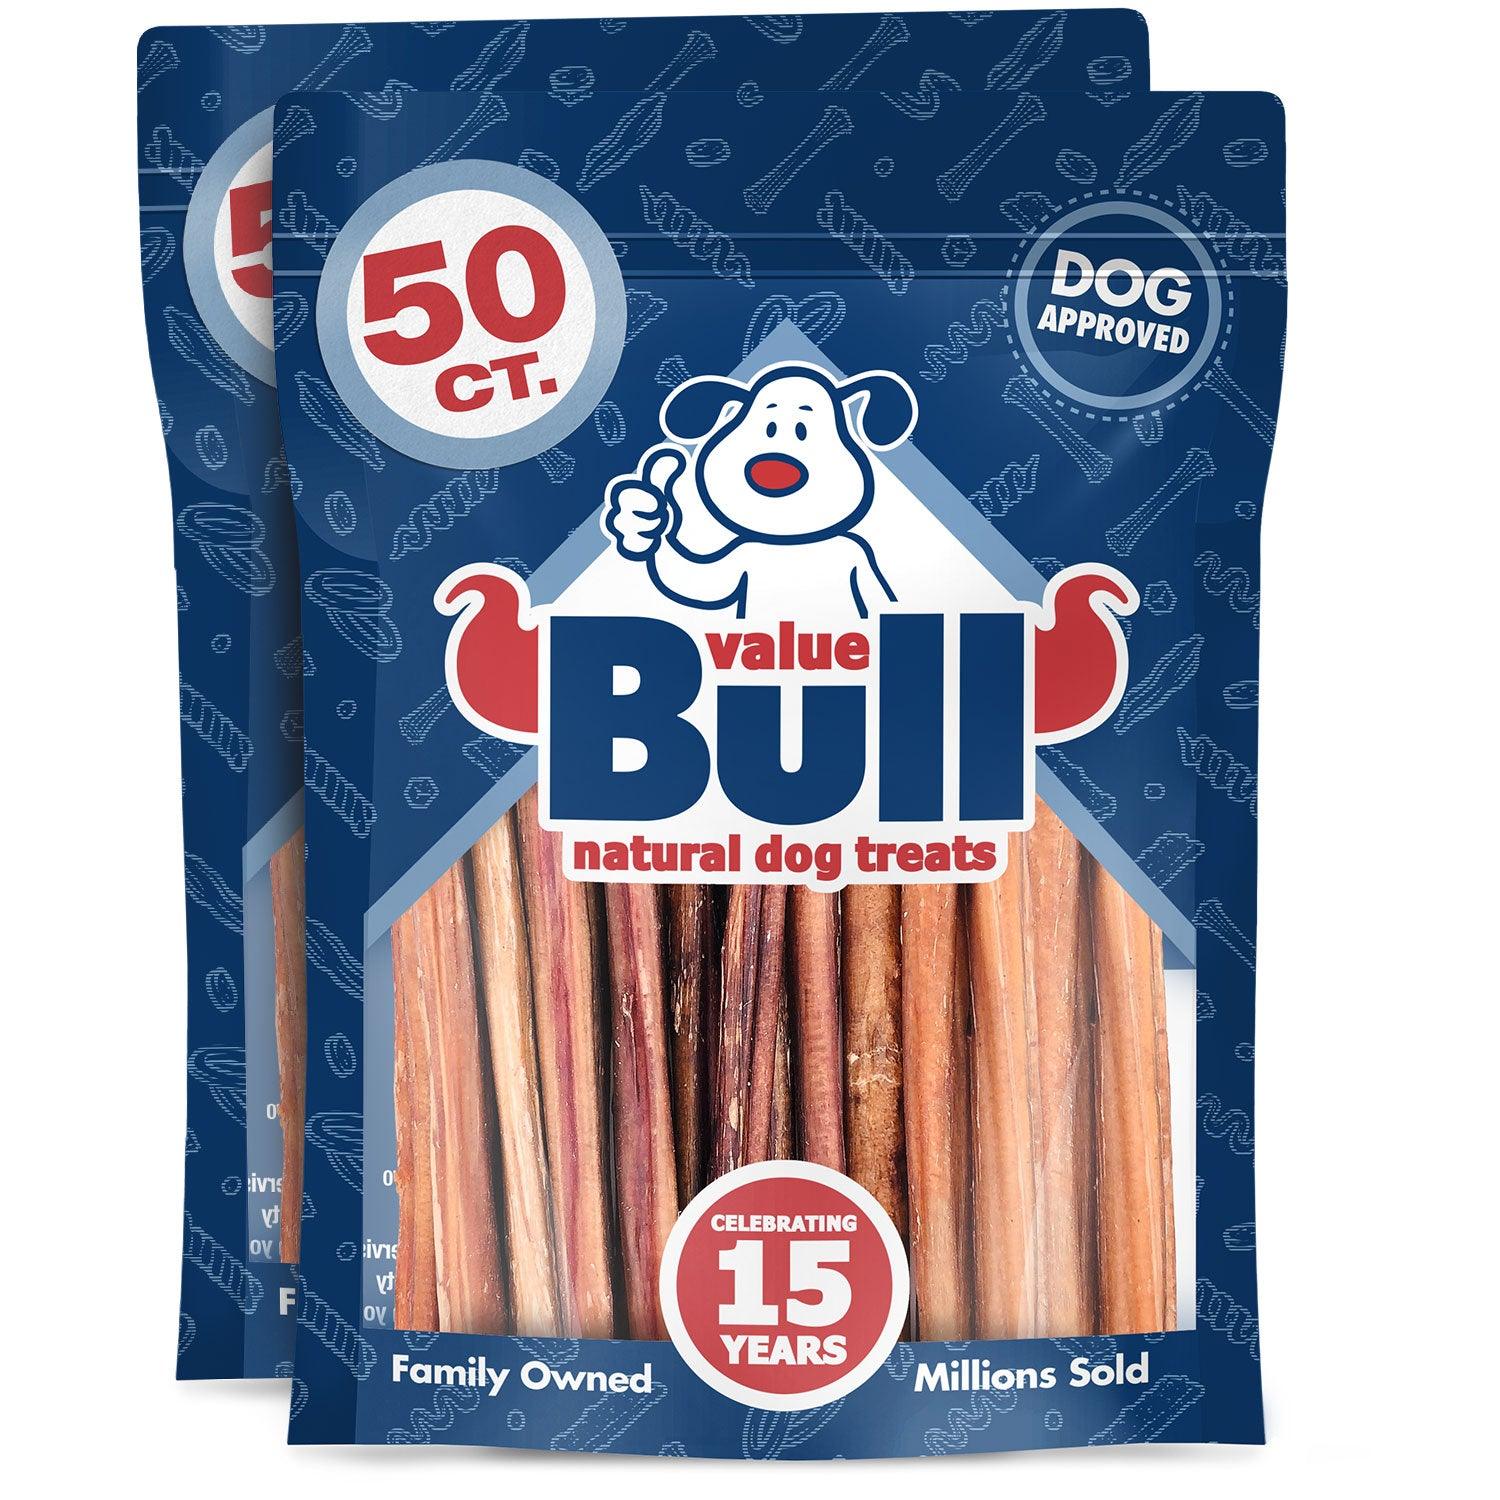 Extra Thin Bully Sticks for Dogs